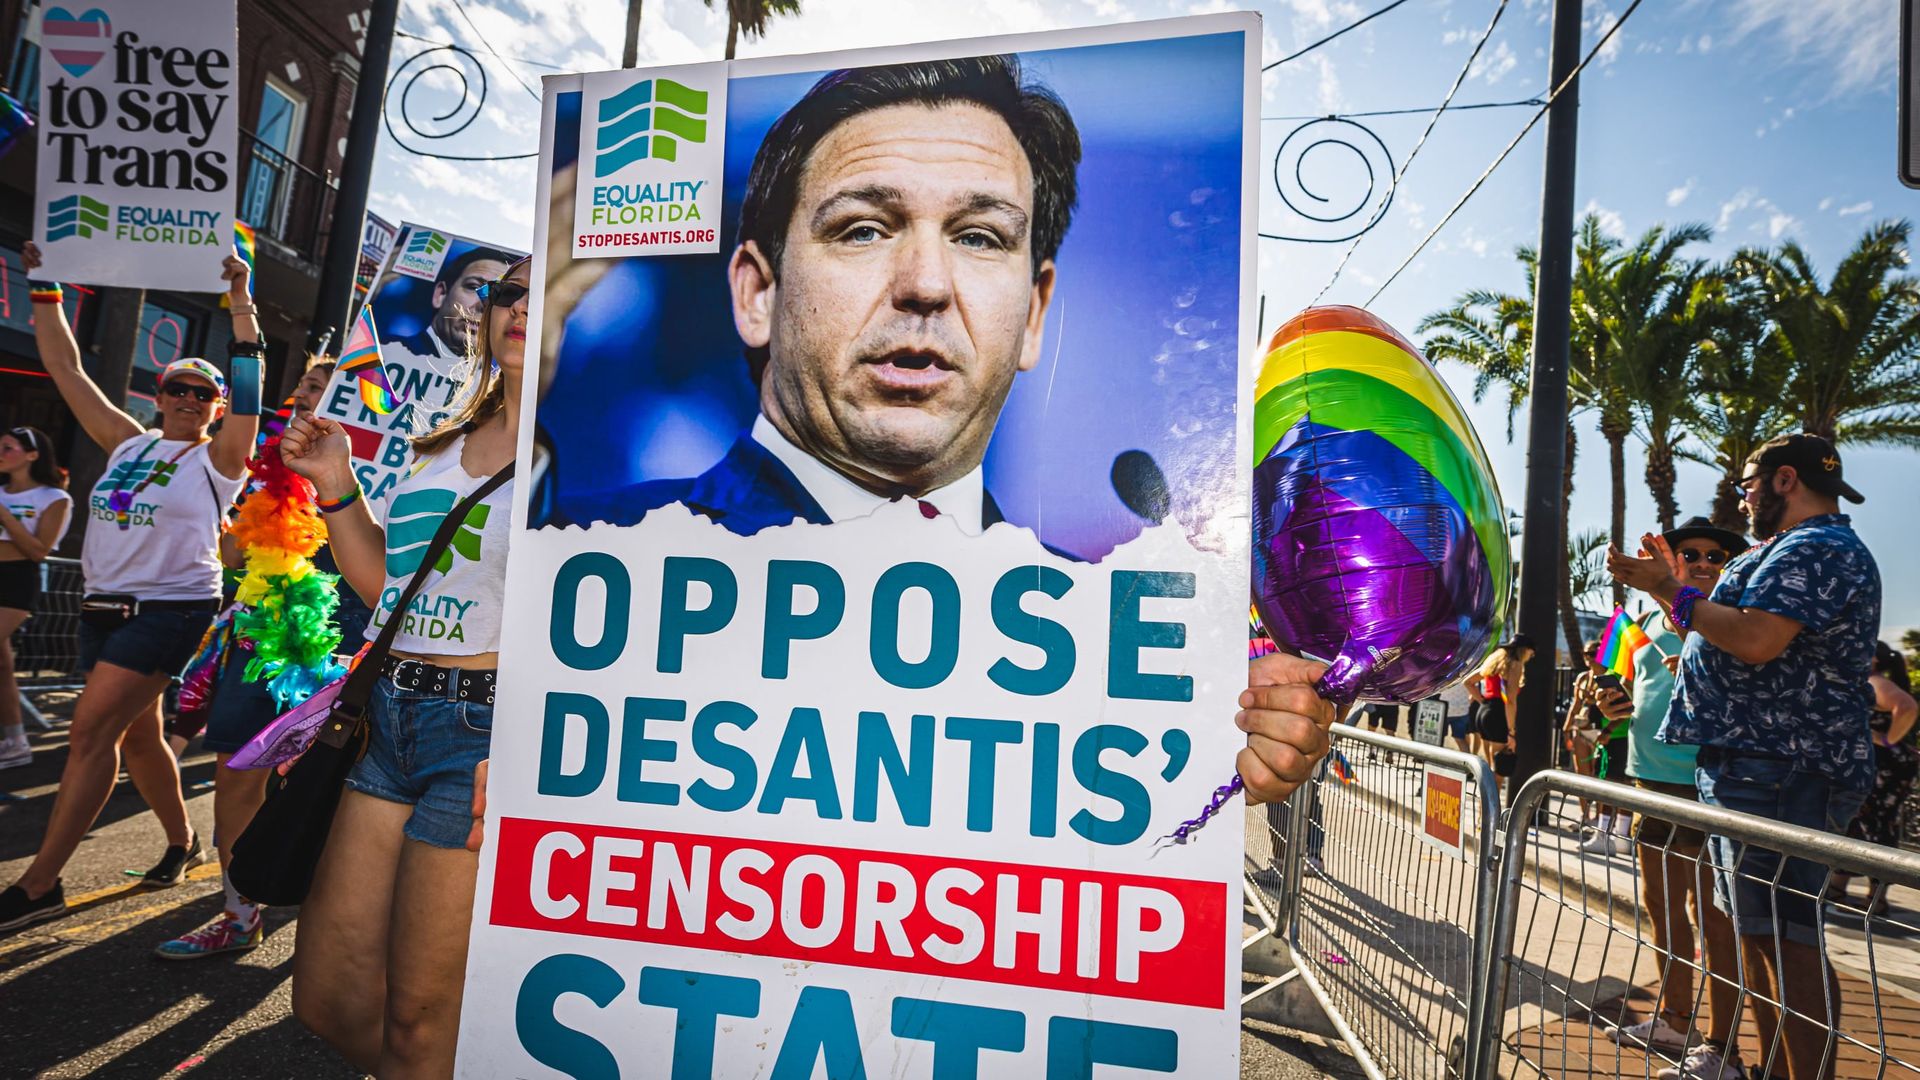 Someone marching in the Pride parade with a sign reading "oppose desantis' censorship state" with a picture of the governor and the Equality Florida logo  